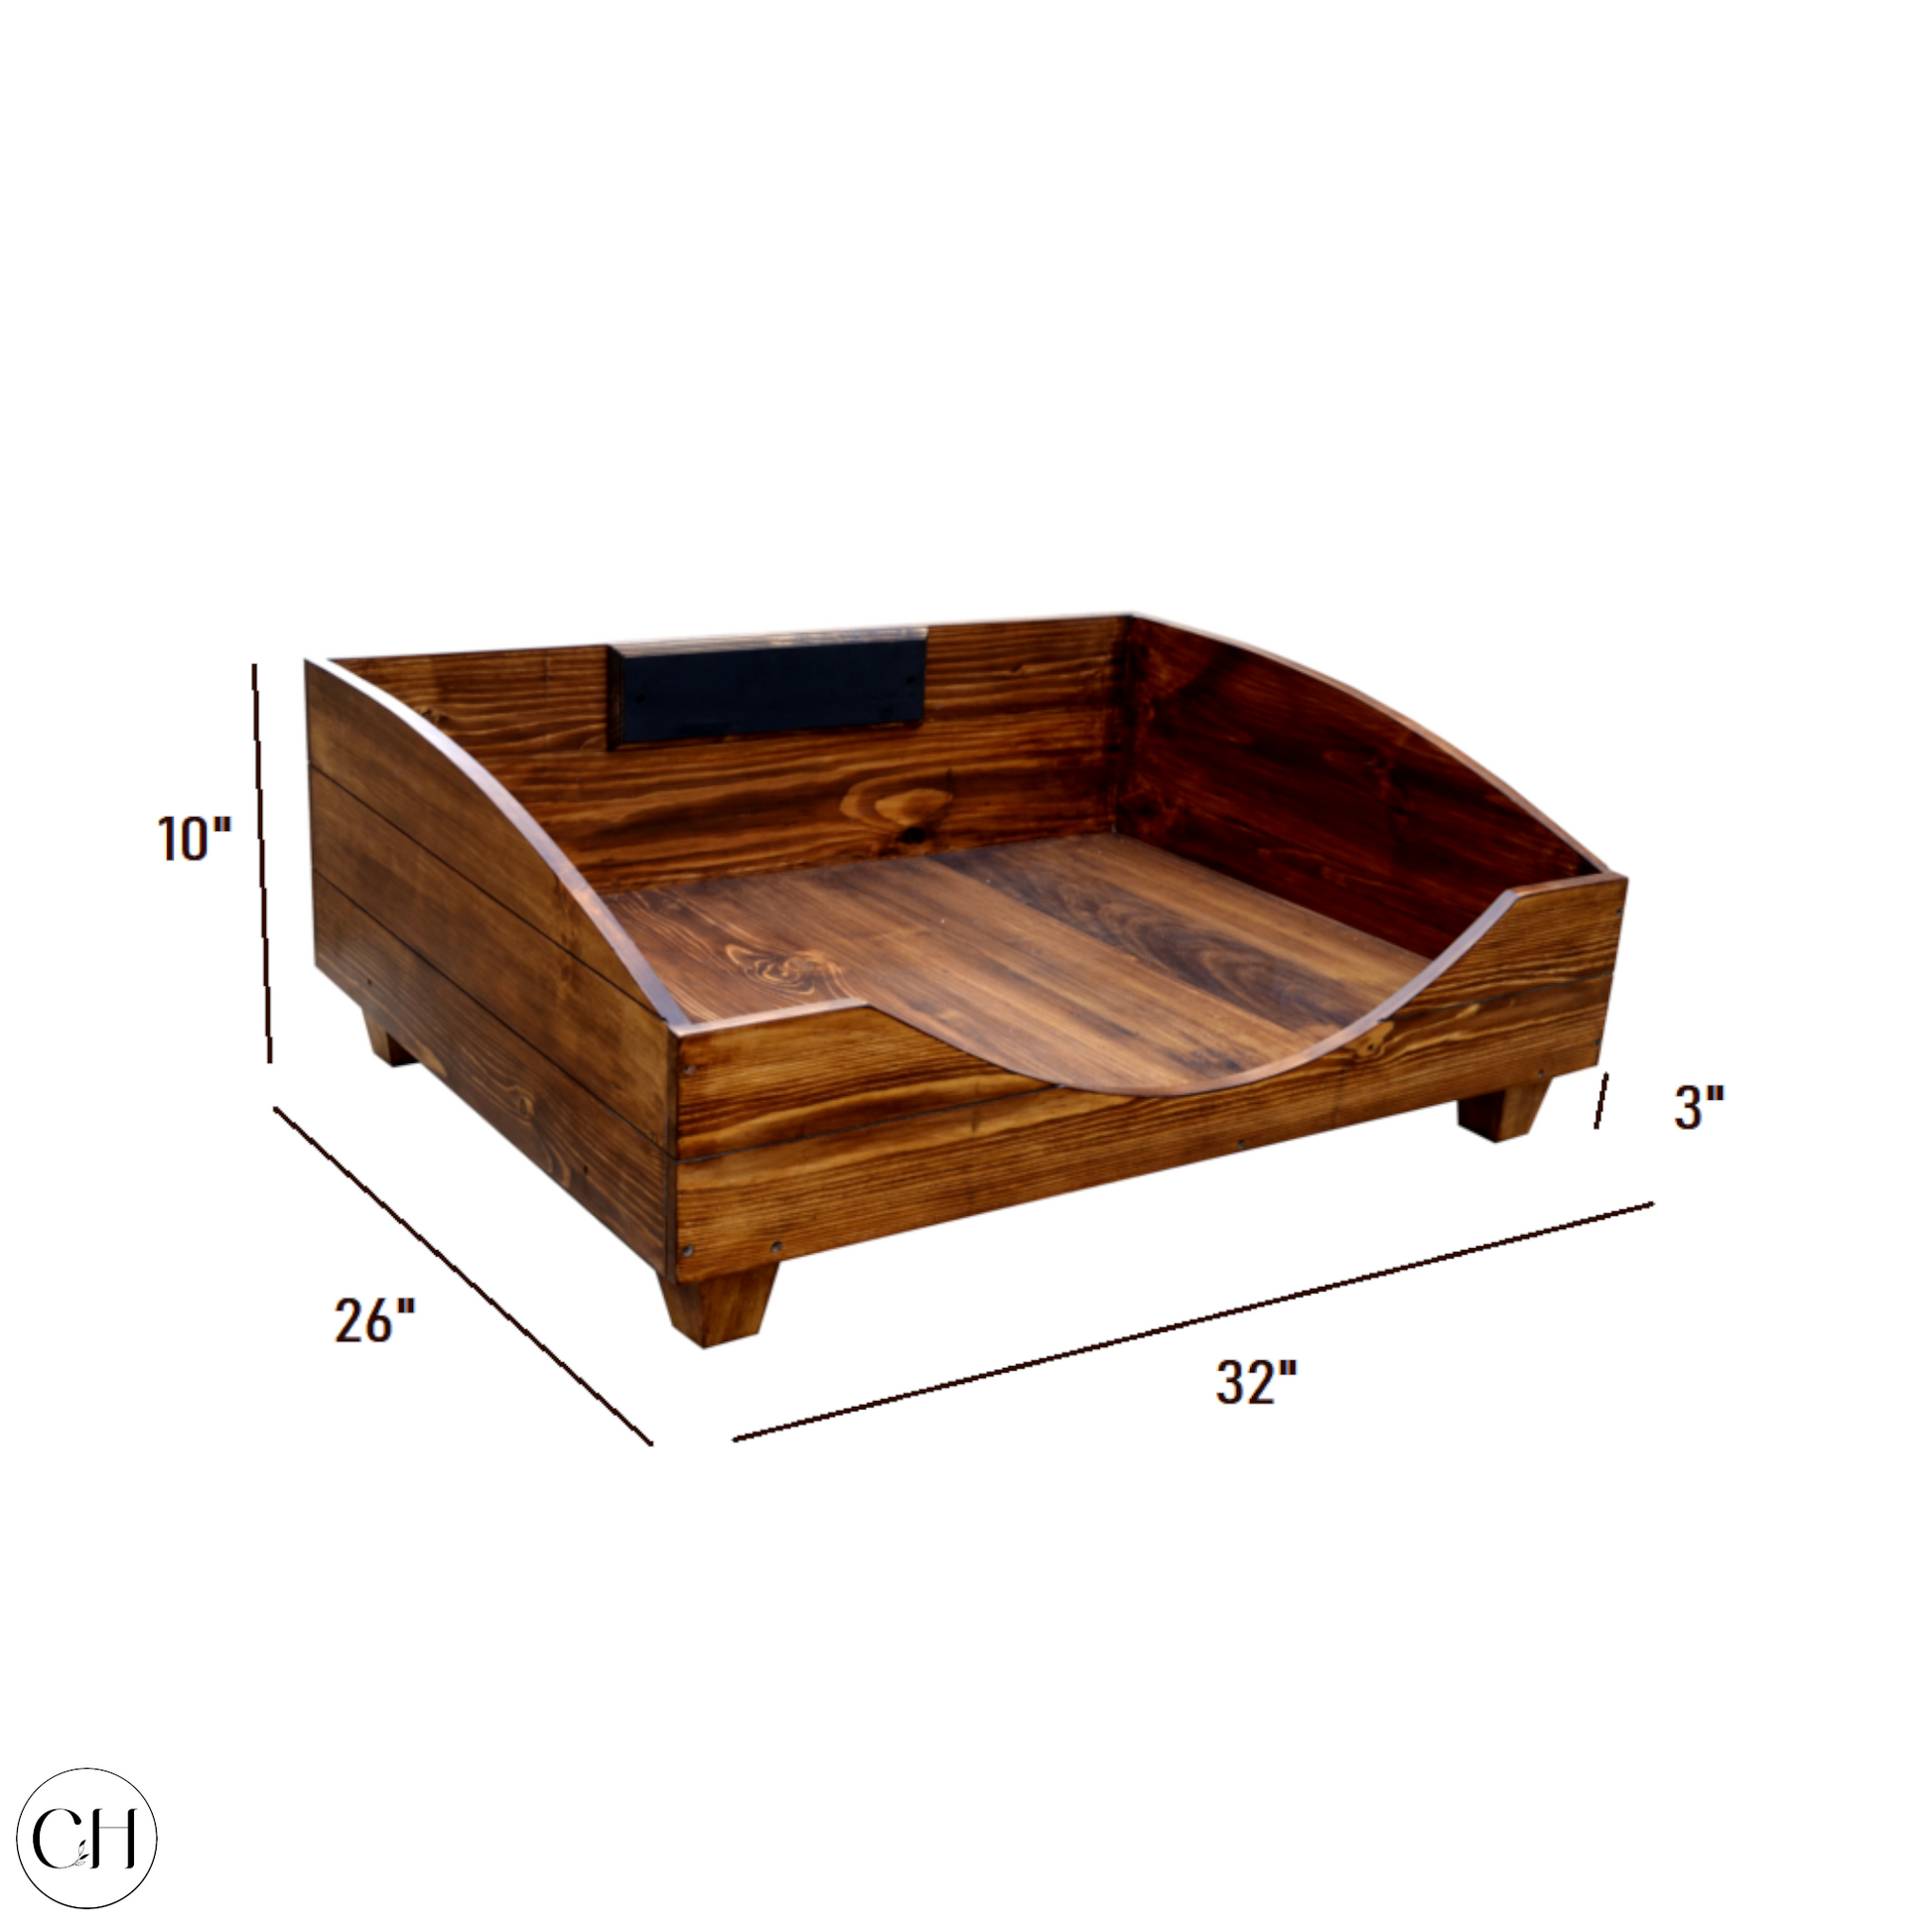 CustHum - Wooden dog bed with blackboard nameplate on the back panel (dimensions)